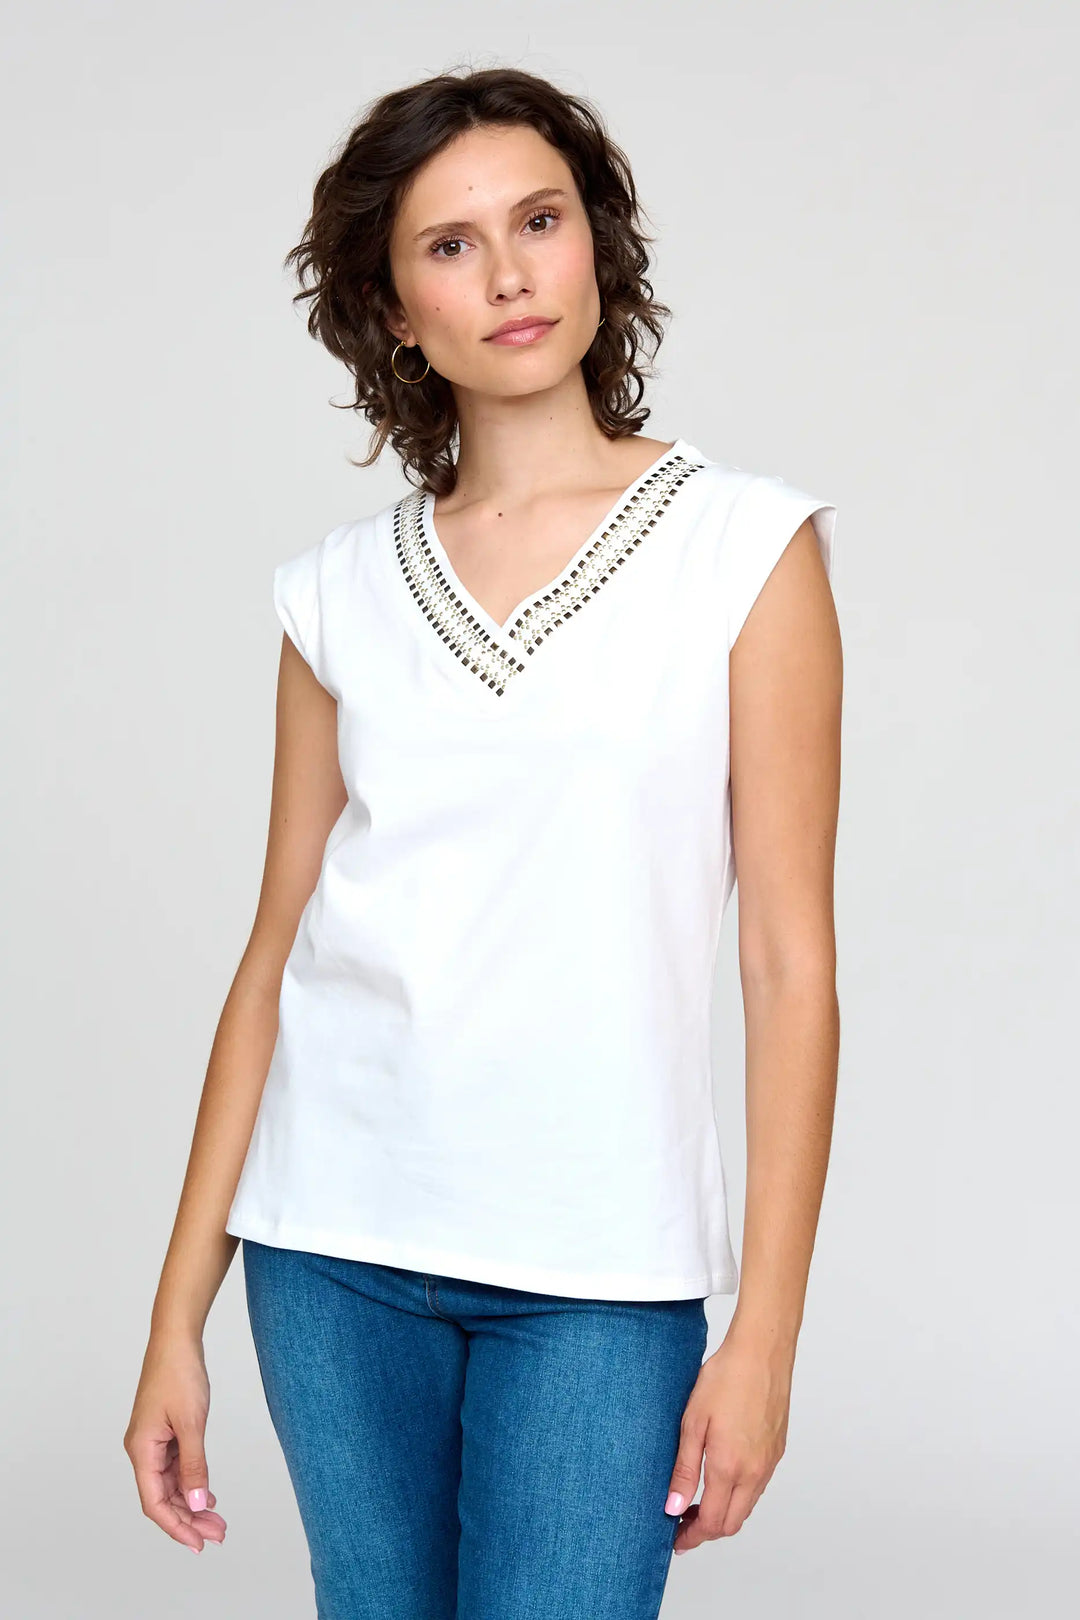 Model wearing the 'Nagoya' style white sleeveless blouse with a studded V-neckline, paired with classic blue jeans.